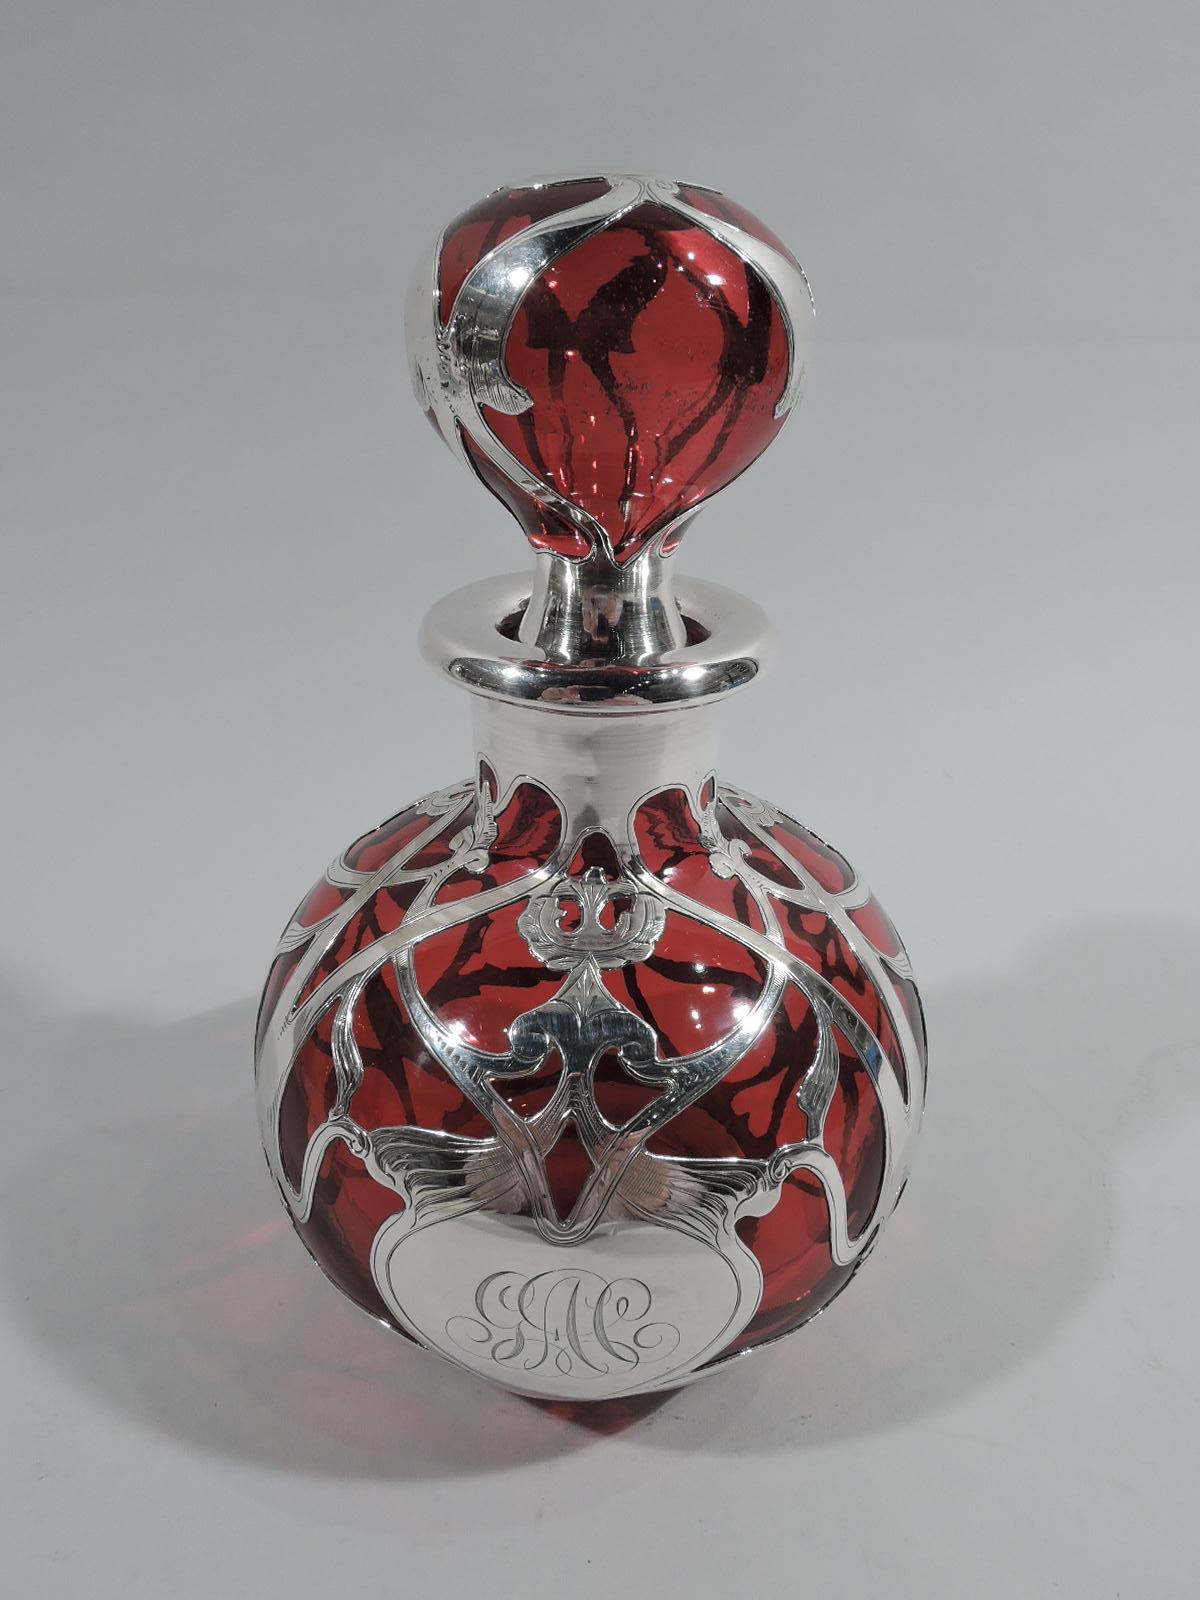 Large turn-of-the-century Art Nouveau glass cologne bottle with engraved silver overlay. Made by Gorham in Providence. Globular with everted rim. Ball stopper. Loose and interlaced scrolled overlay with flower heads and leaves in symmetrical